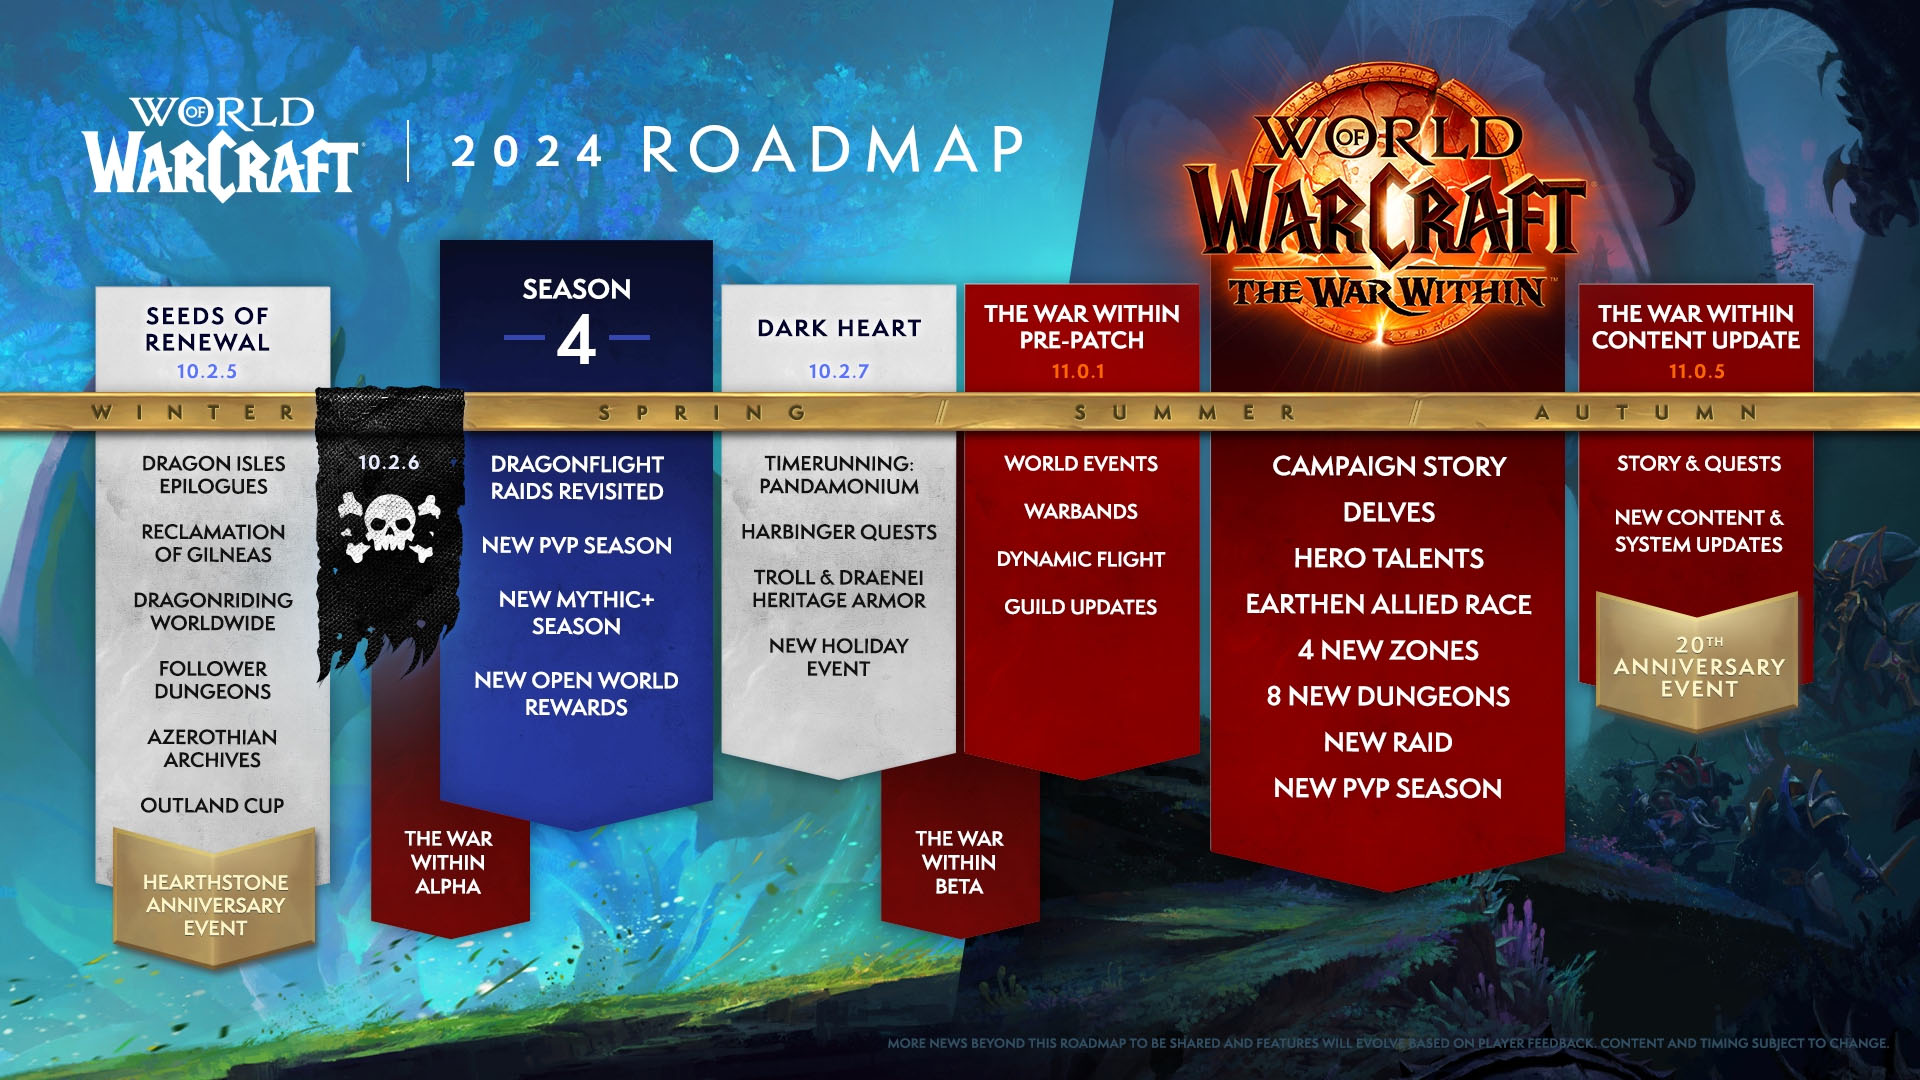 Preparing for The War Within - Wowhead Economy Weekly Wrap-Up 317